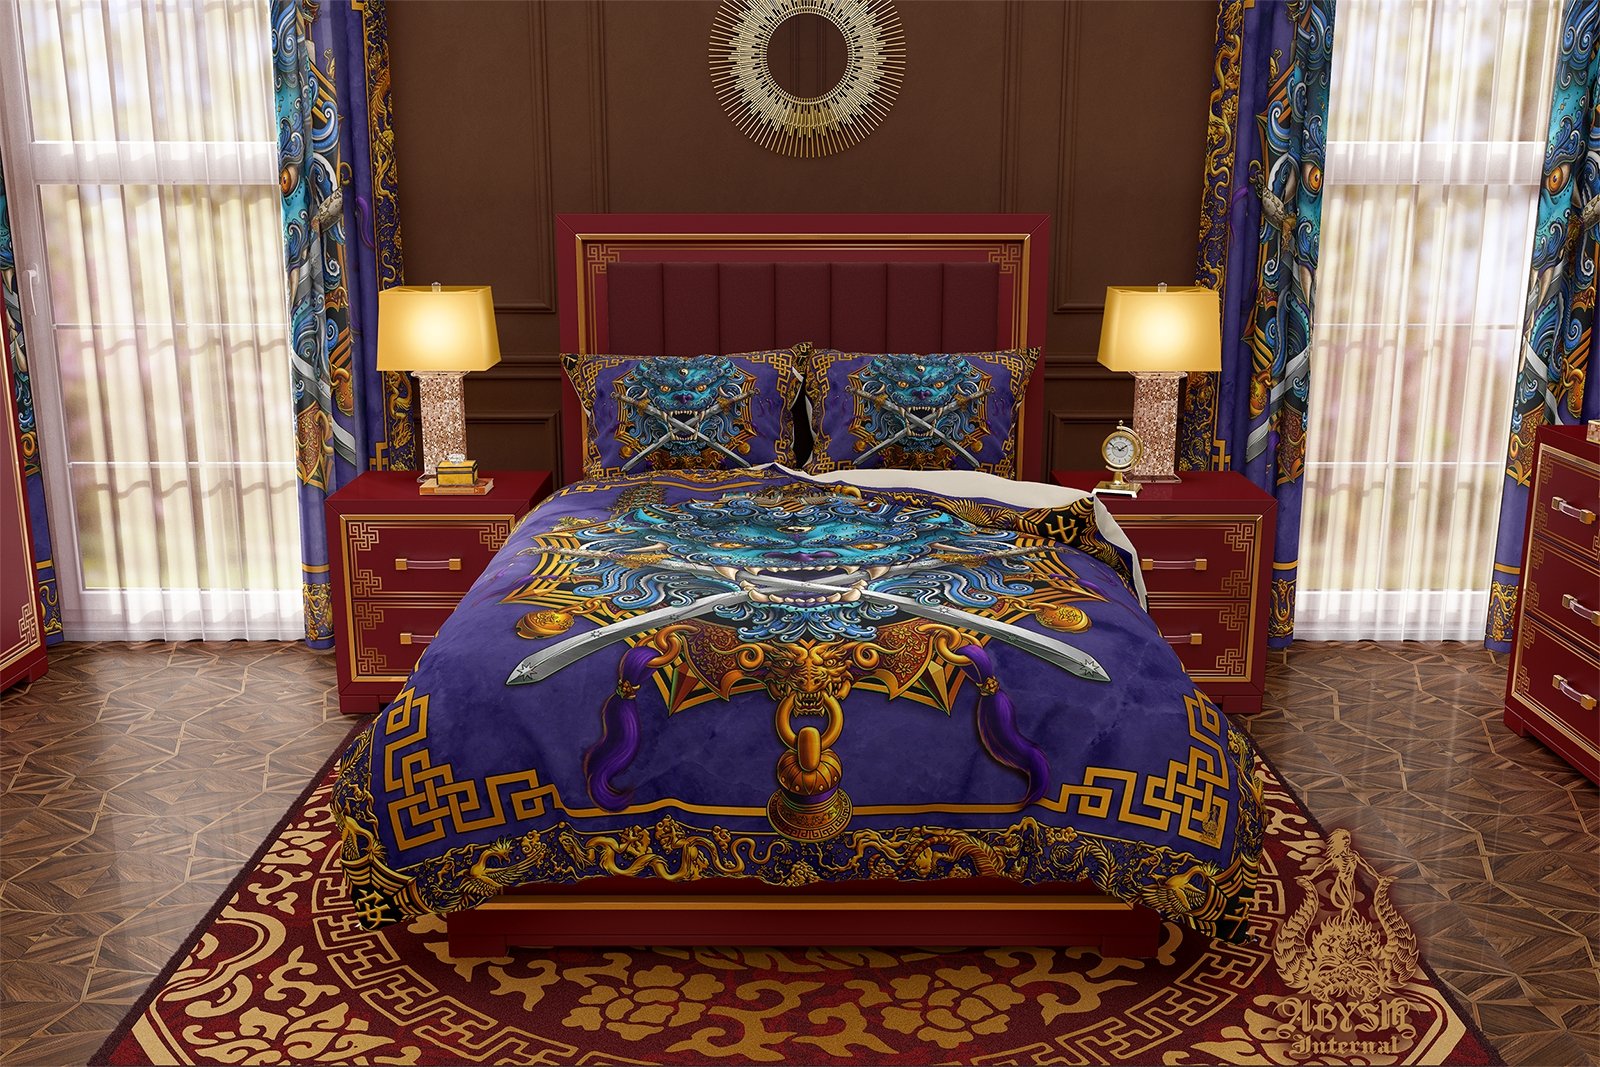 Asian Lion Bedding Set, Comforter and Duvet, Taiwan Sword Lion, Chinese Bed Cover, Gamer Bedroom, Indie Decor, King, Queen and Twin Size - Traditional Blue - Abysm Internal